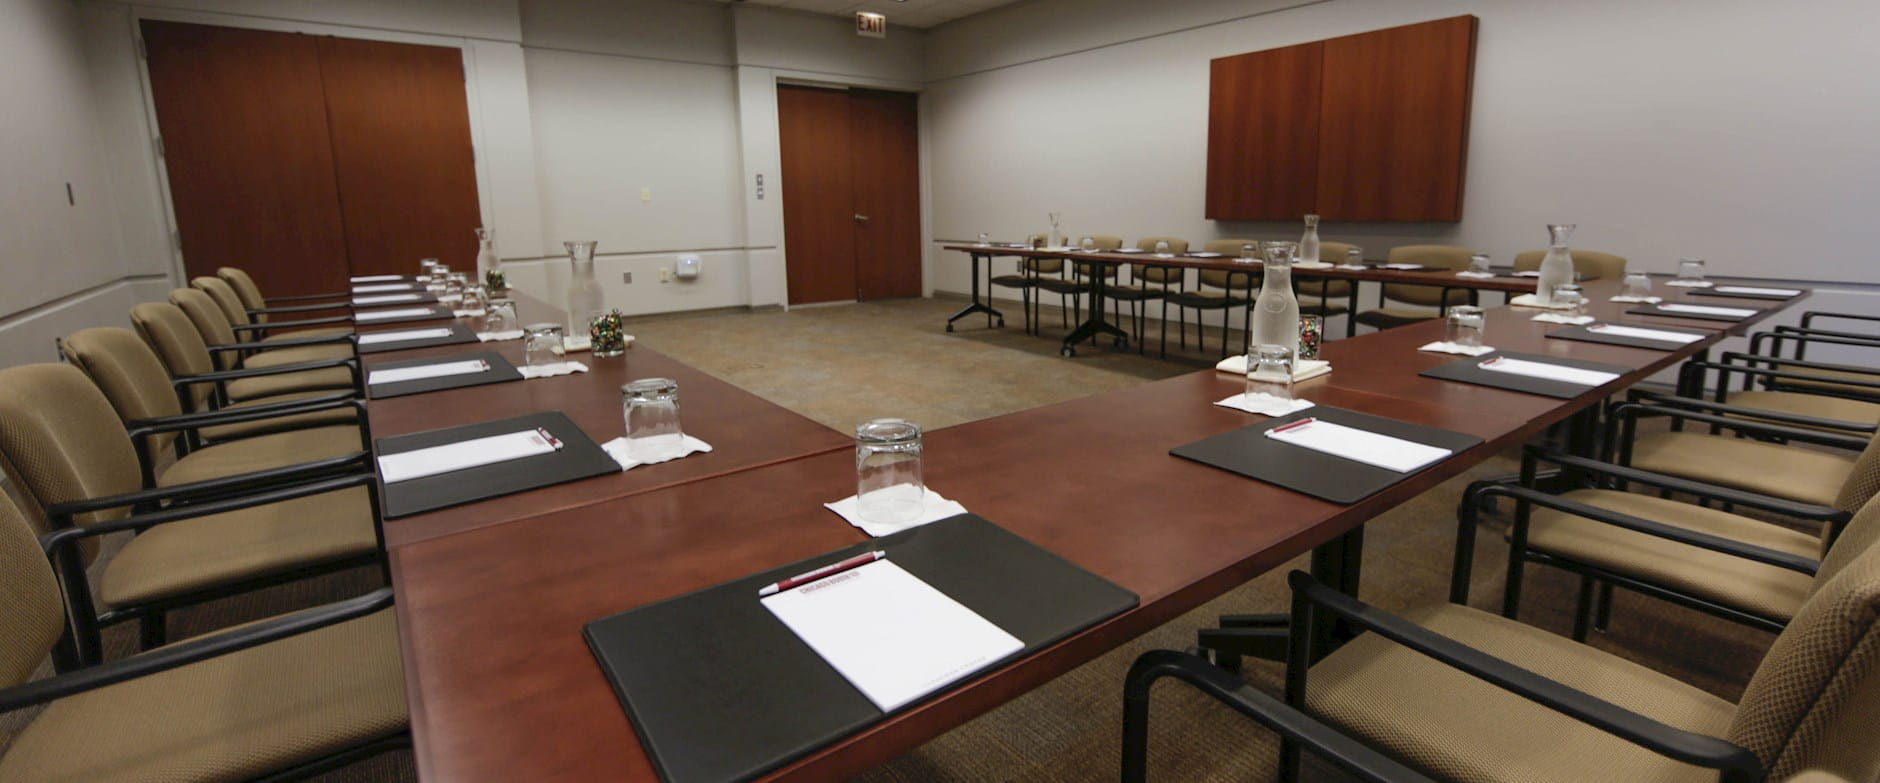 Gleacher Center Executive Meeting Room with warm wooden tables in a U-shape